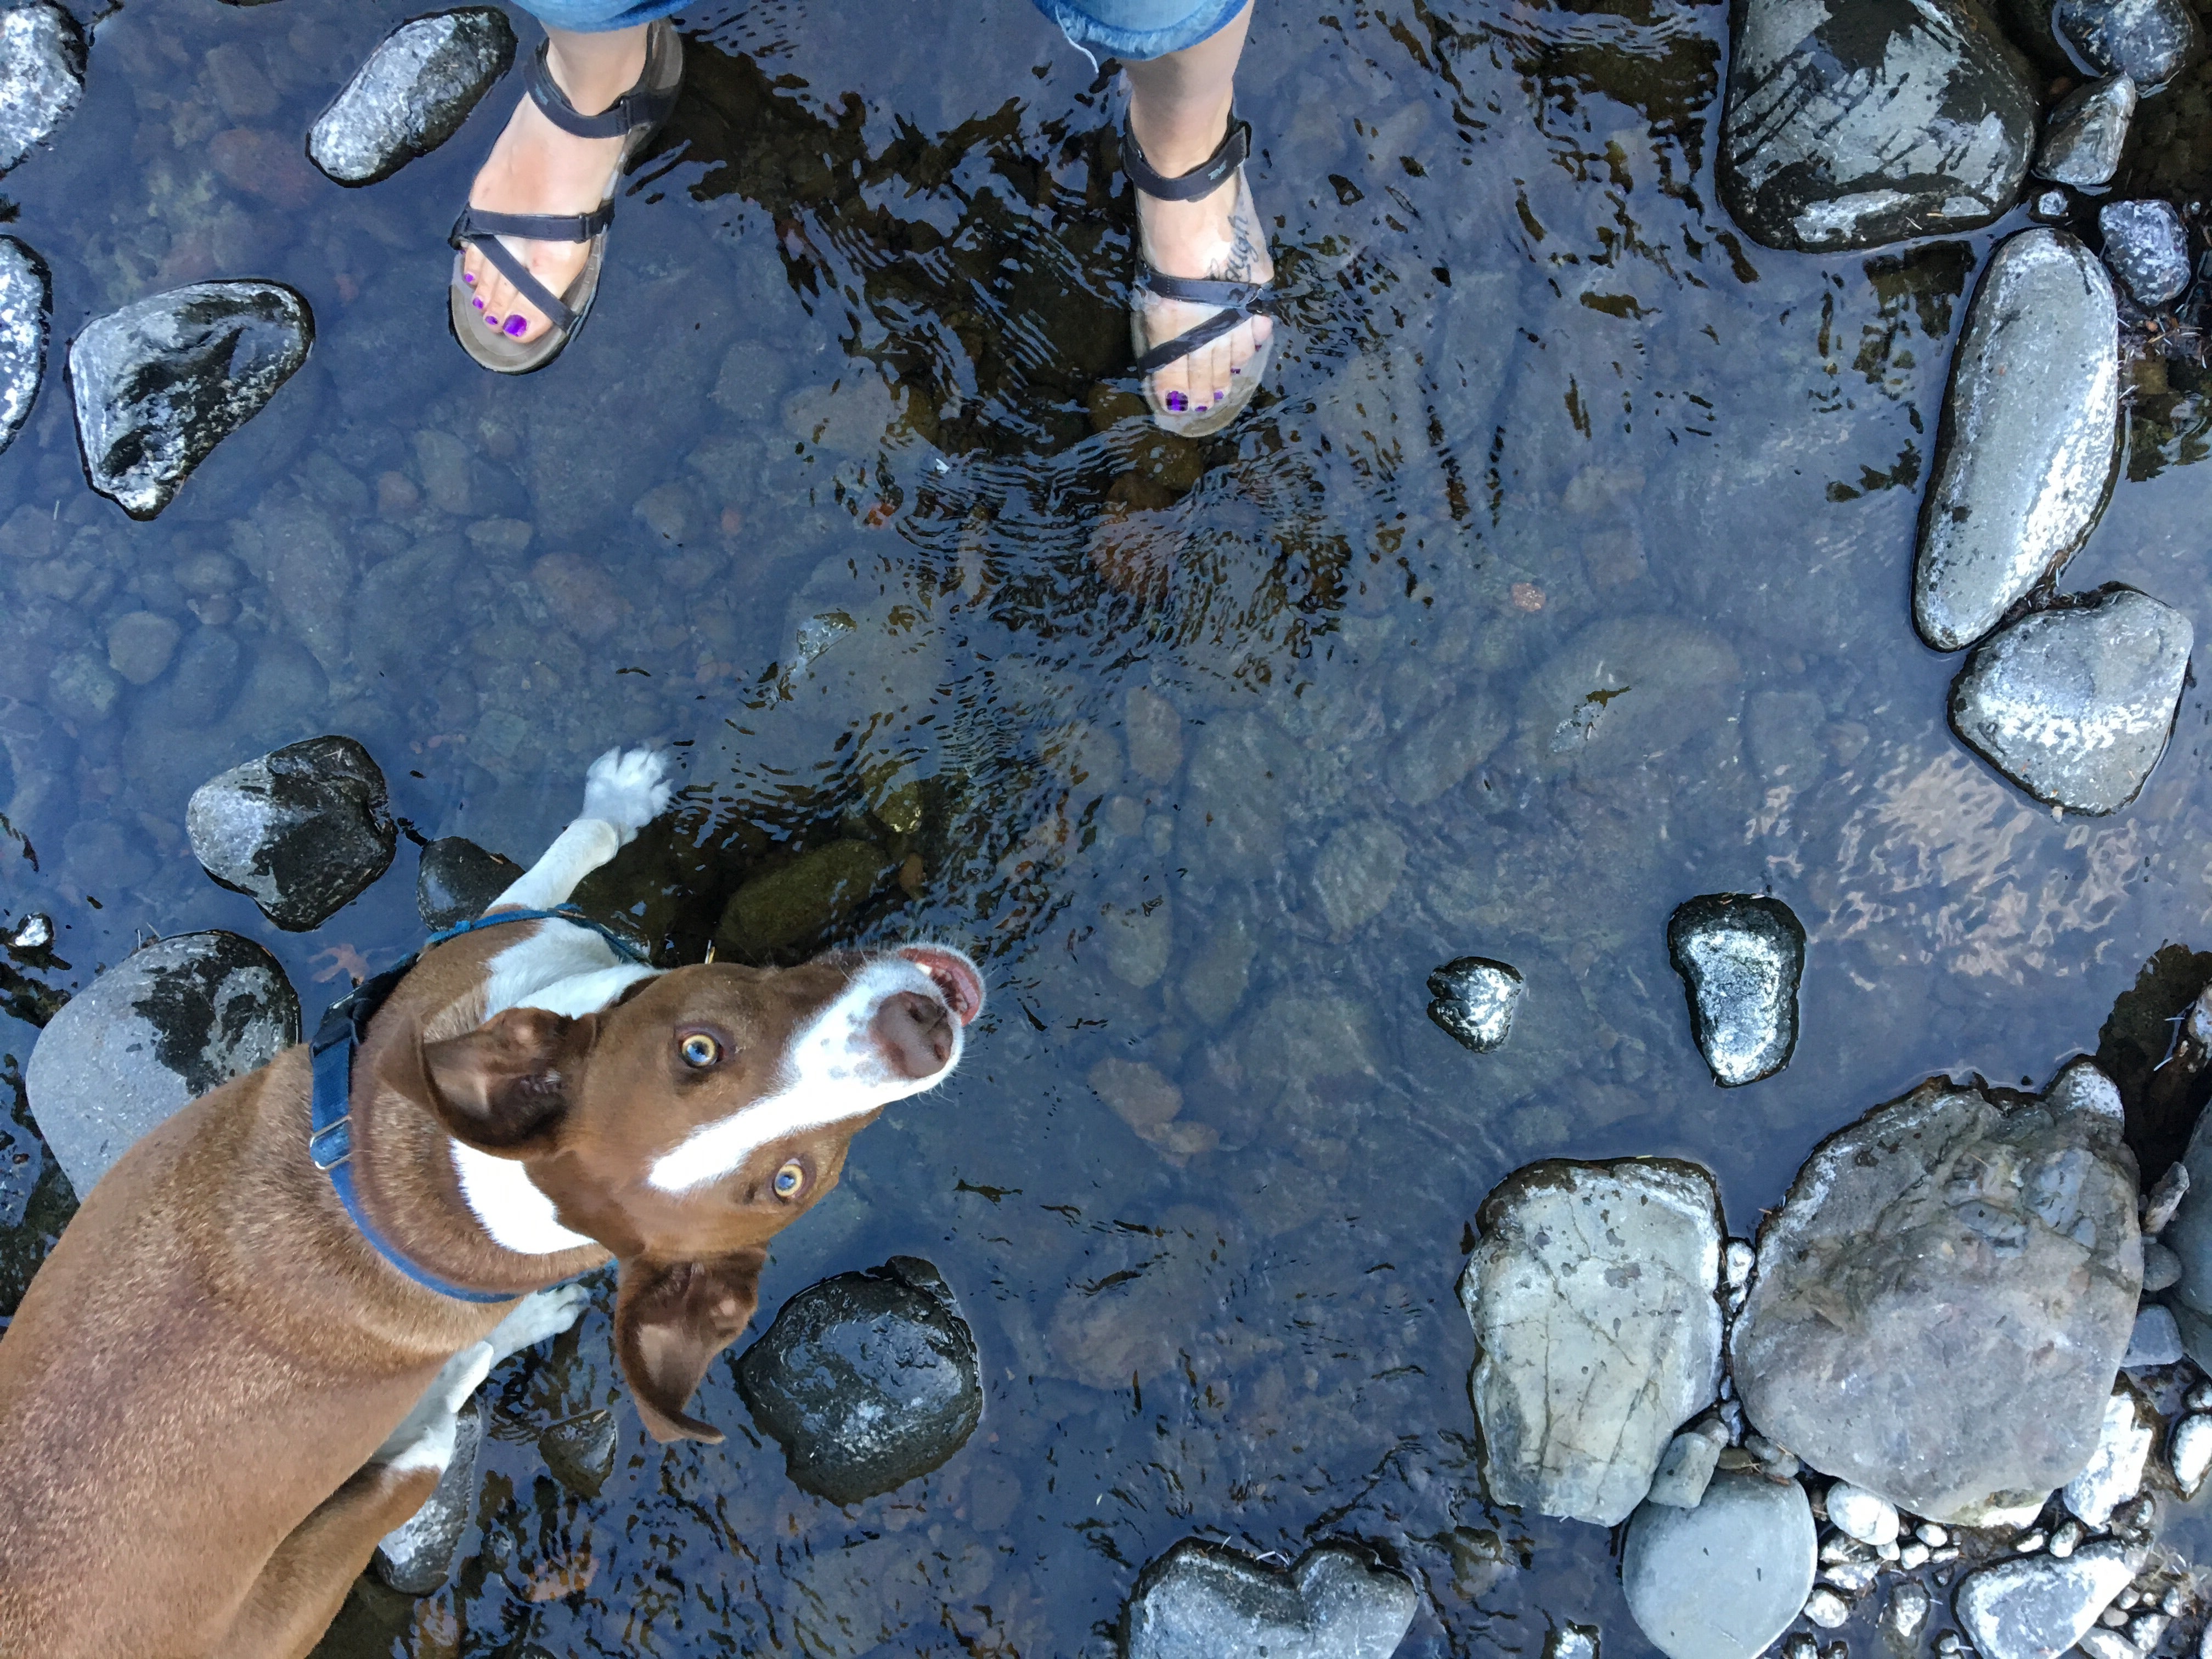 My dog Jackson and I loved this stream at the campground. Take off your shoes and stick your feet in the icy water! Feels great after walking on hard sand at the beach all day. 